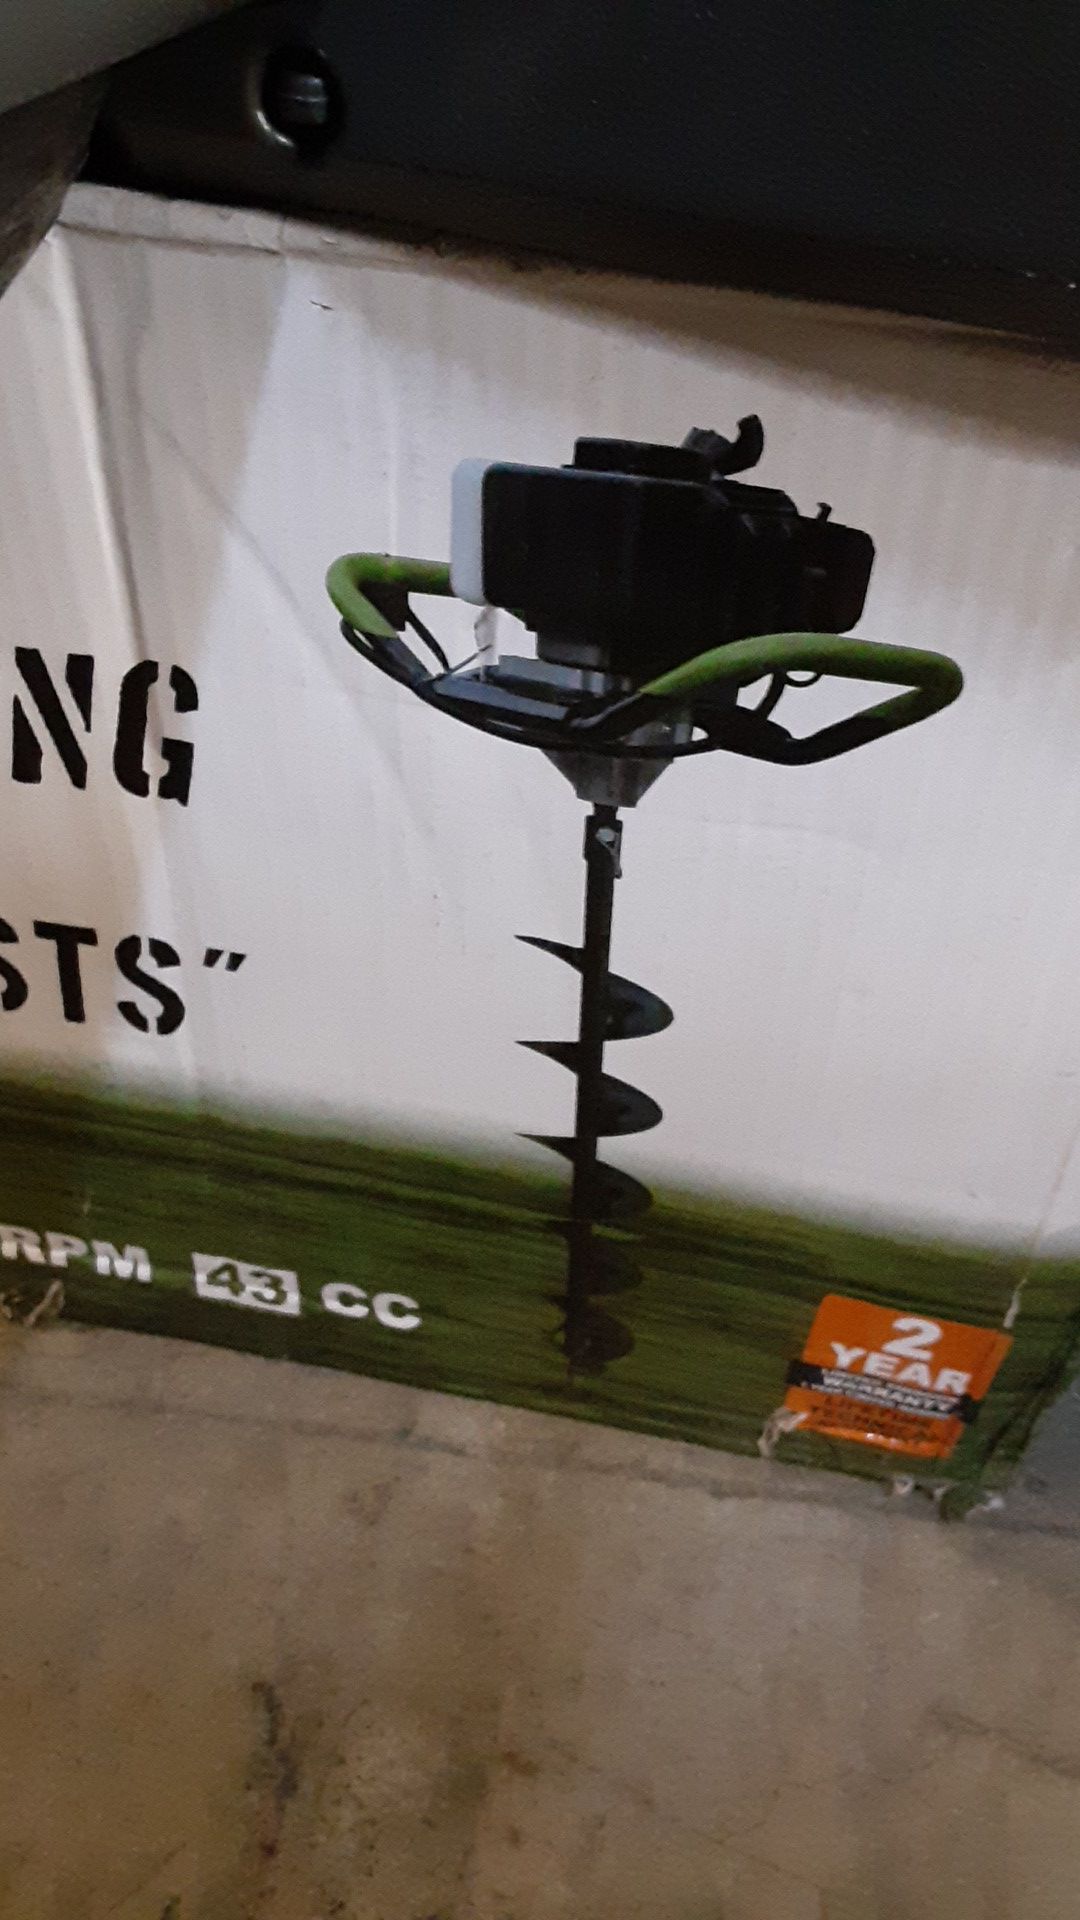 Sportsman earth series 6 inch gas powered auger